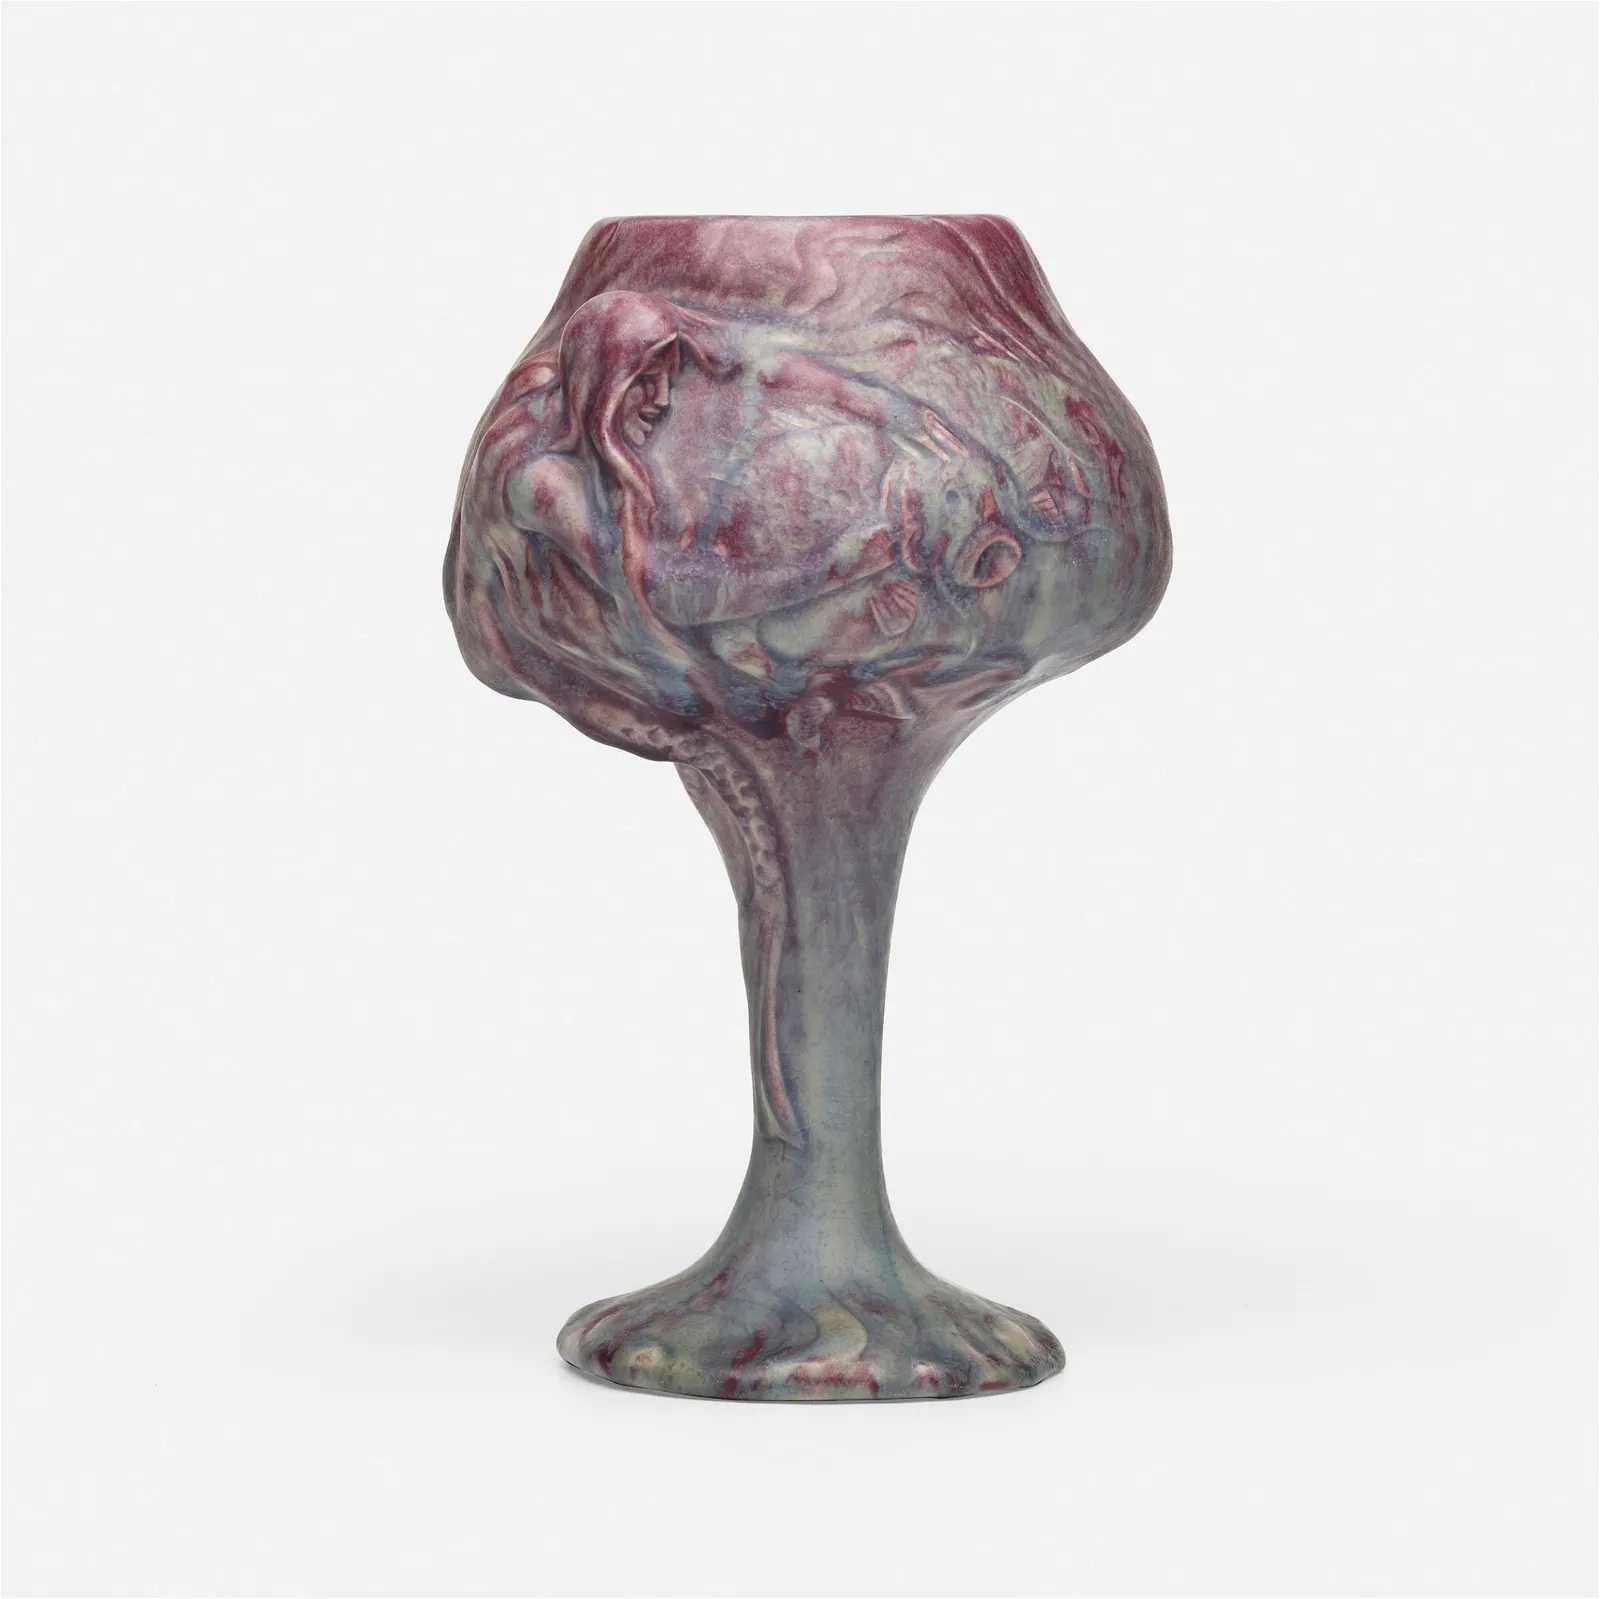 Early Artus Van Briggle chalice and vase aim for new heights at Rago April 24